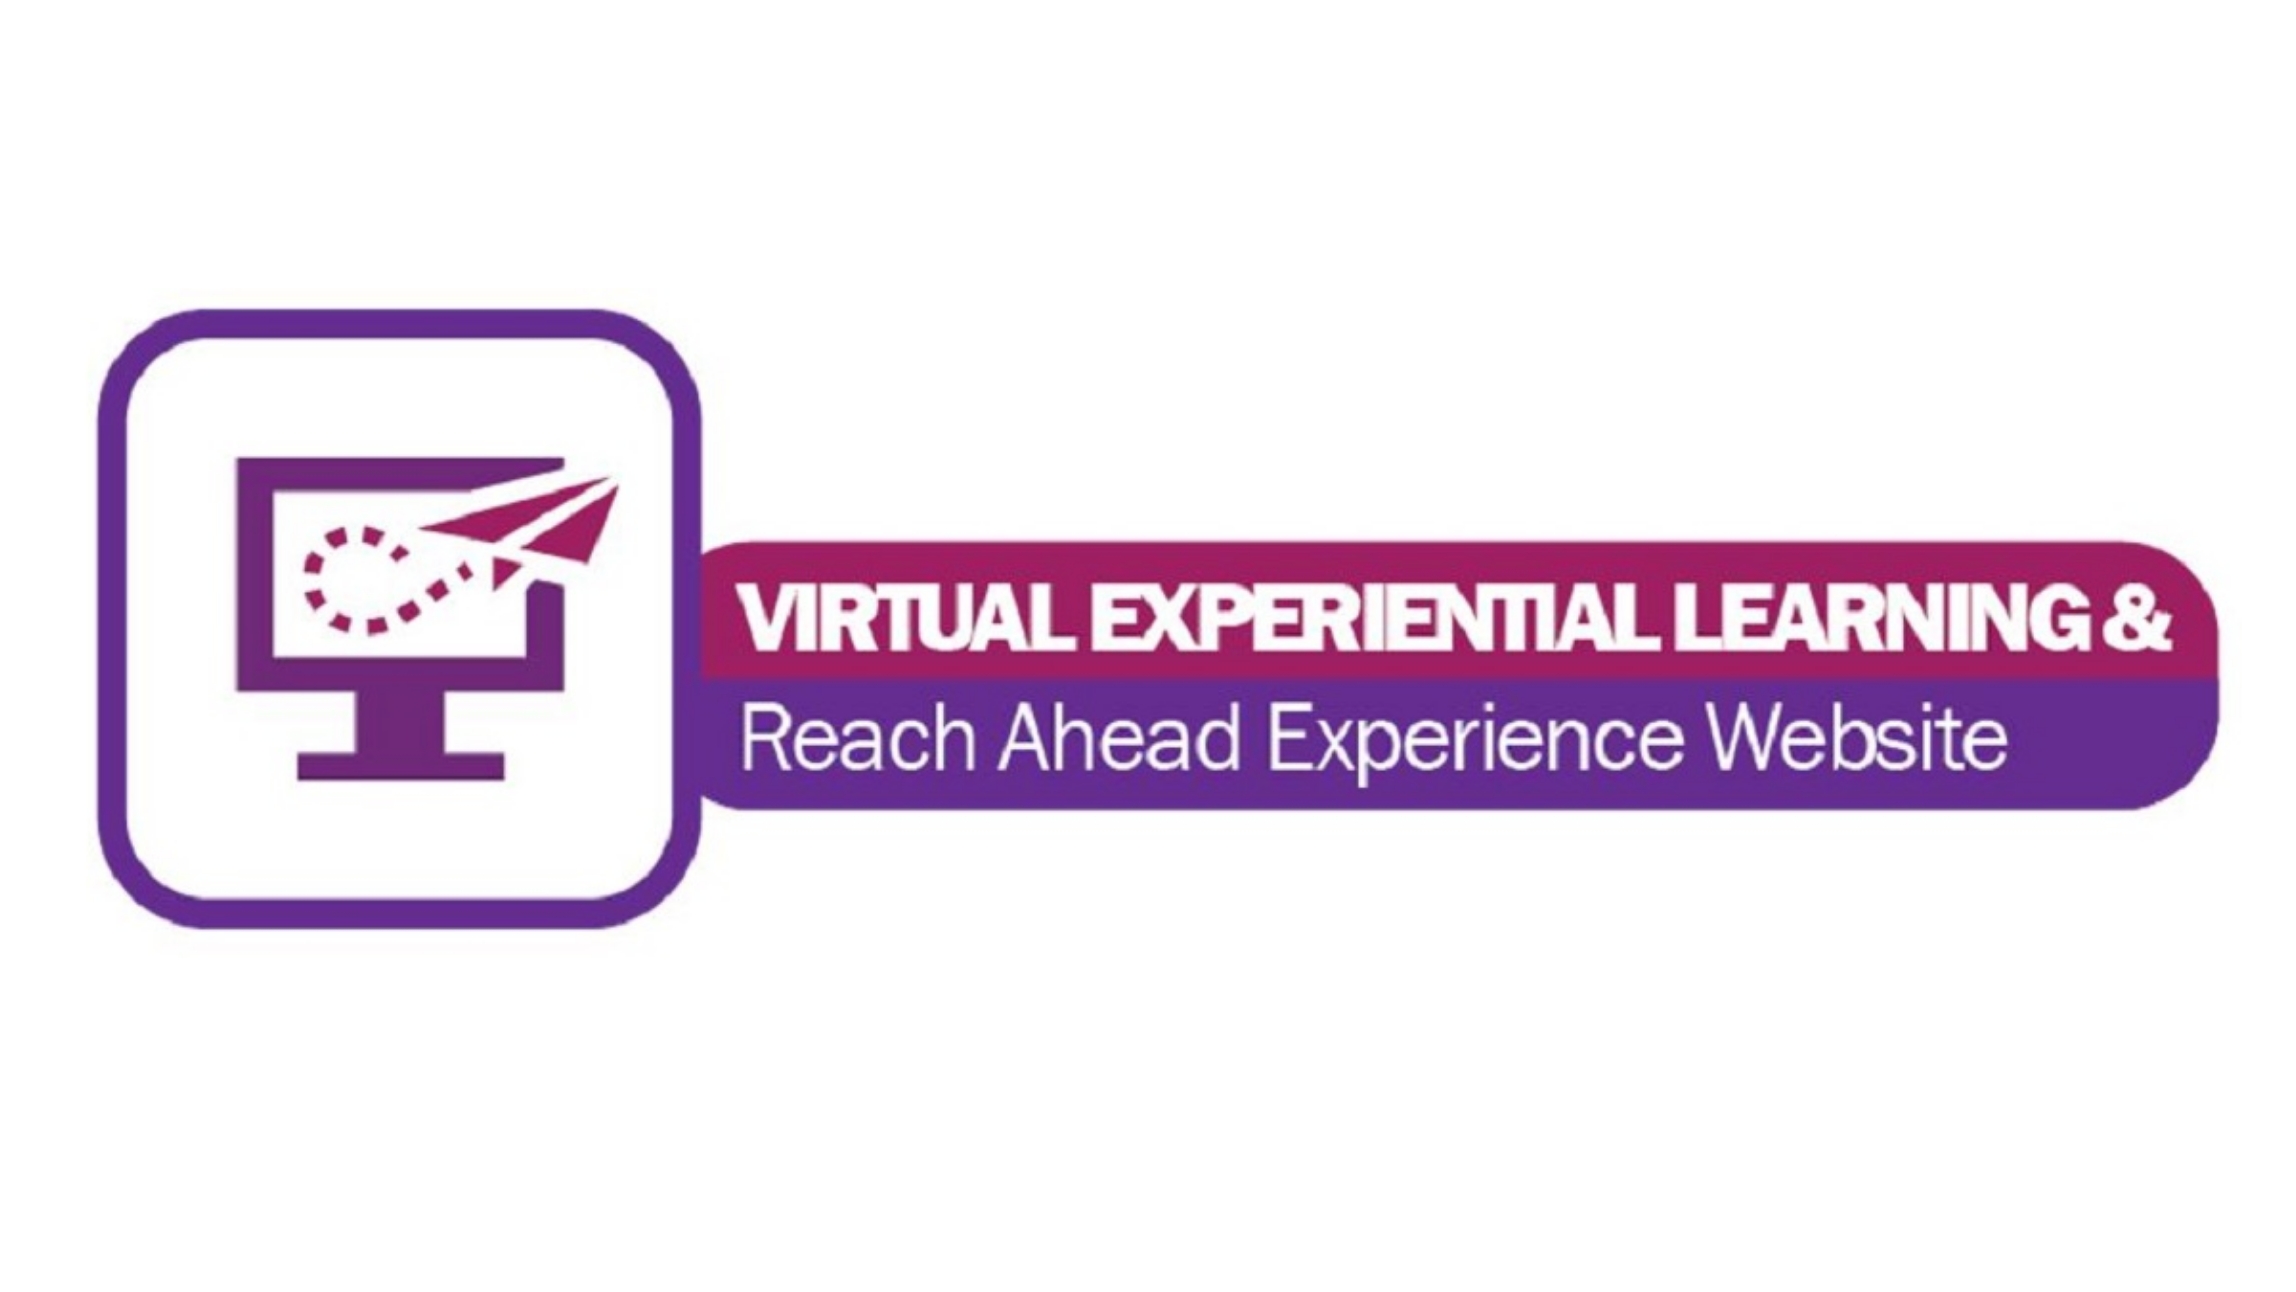 Virtual Experiential Learning & Reach Ahead Experience Website